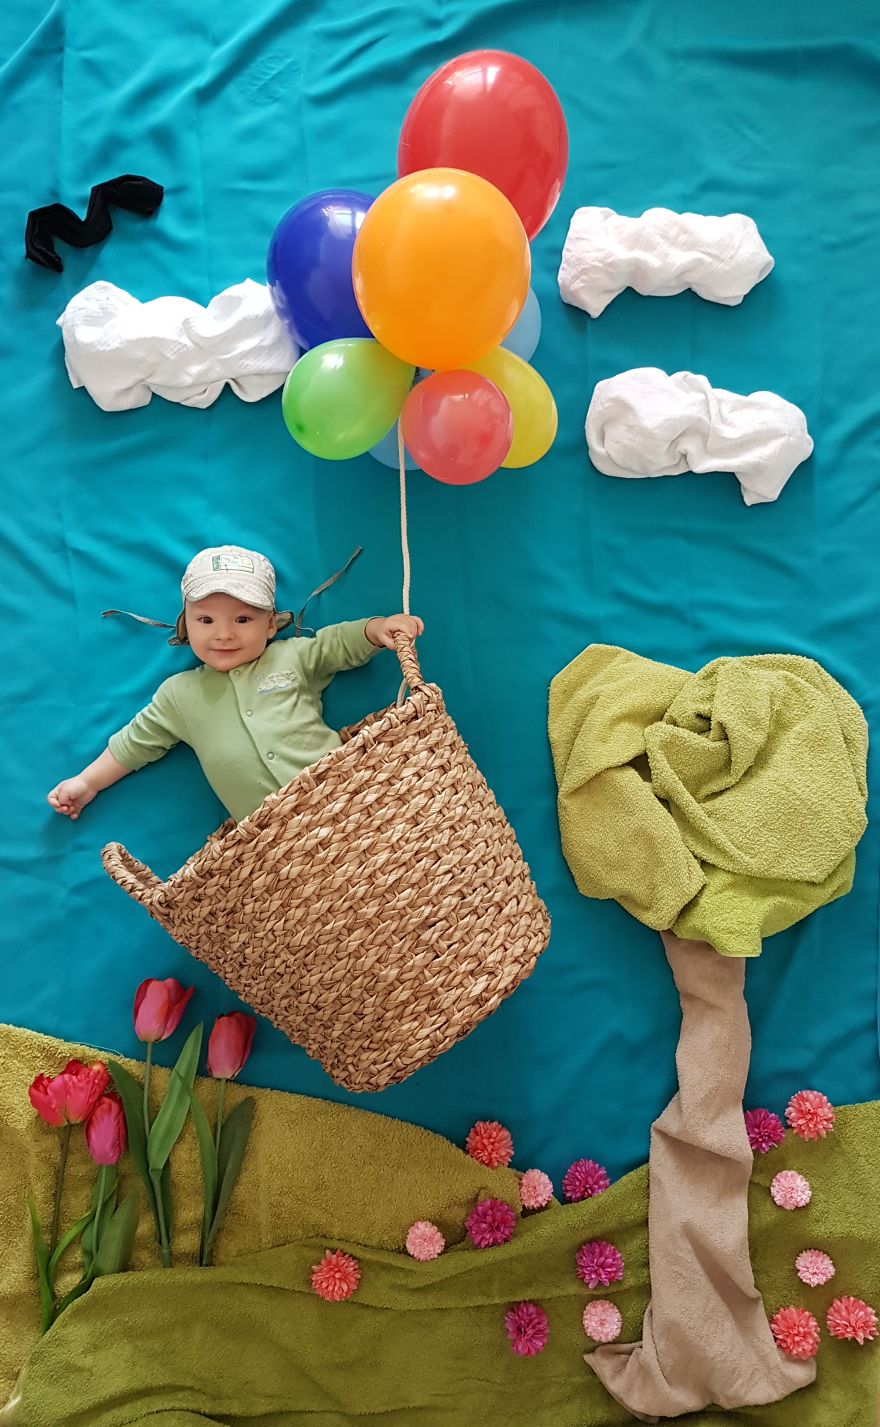 I Turn My Son’s Baby Pics Into Cute Imaginary Adventures